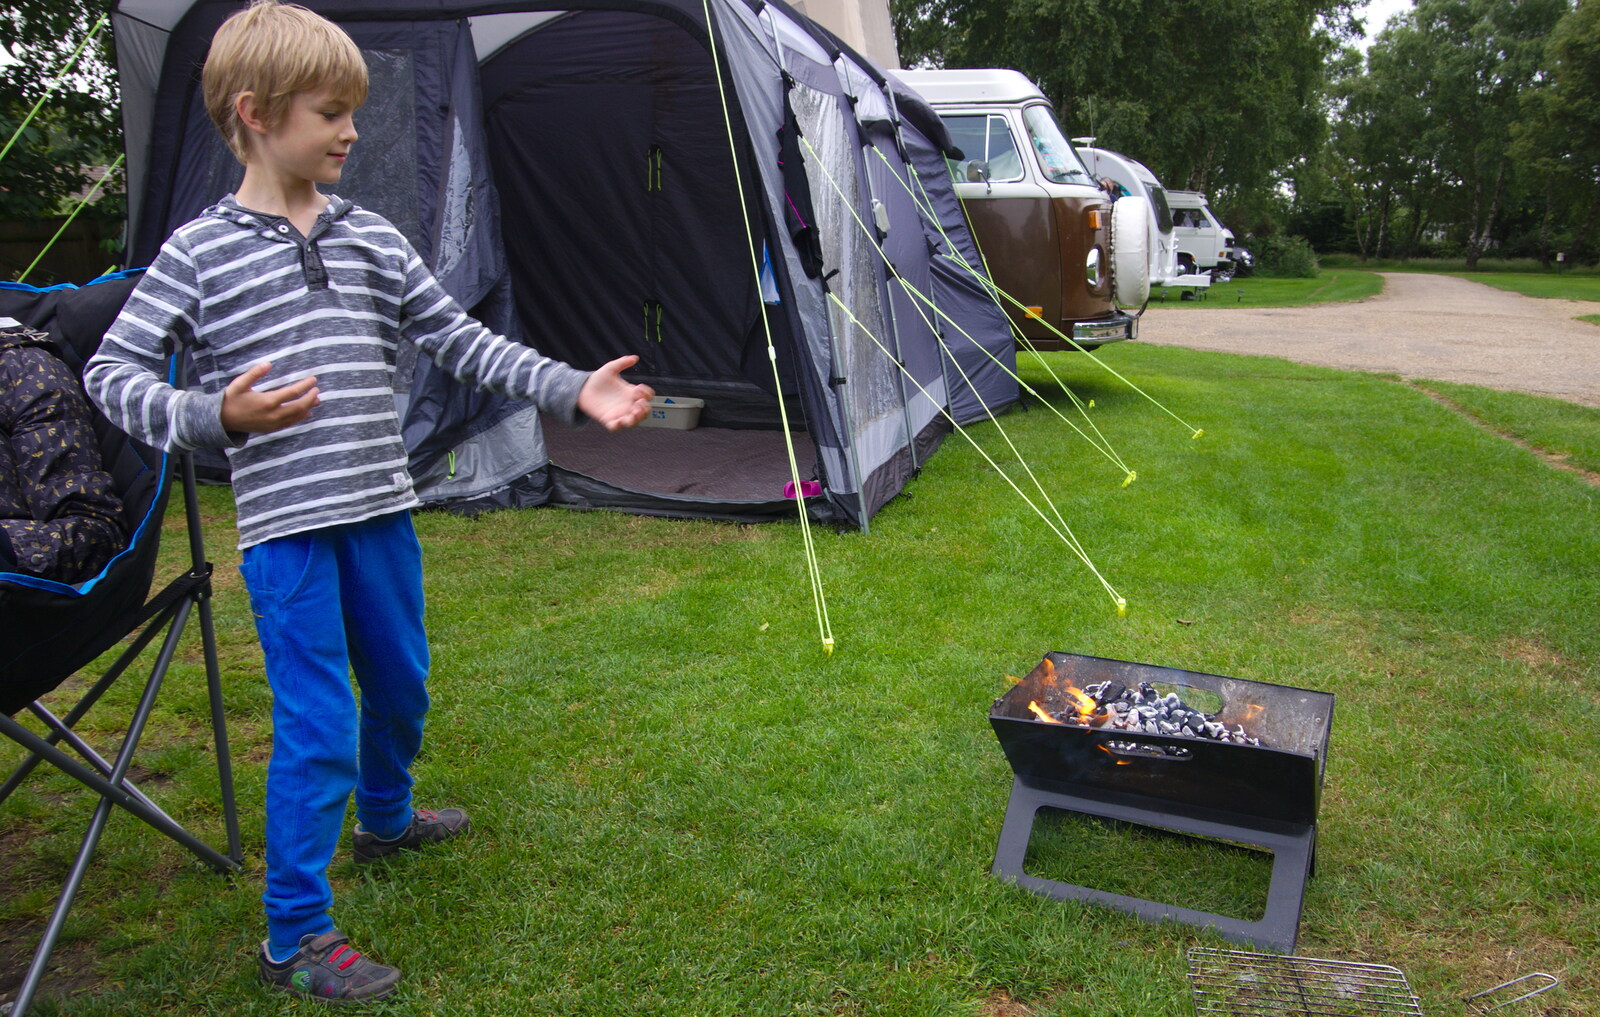 Harry does some of his Ninja moves on the barbeque from Kelling Camping and the Potty Morris Festival, Sheringham, North Norfolk - 6th July 2019